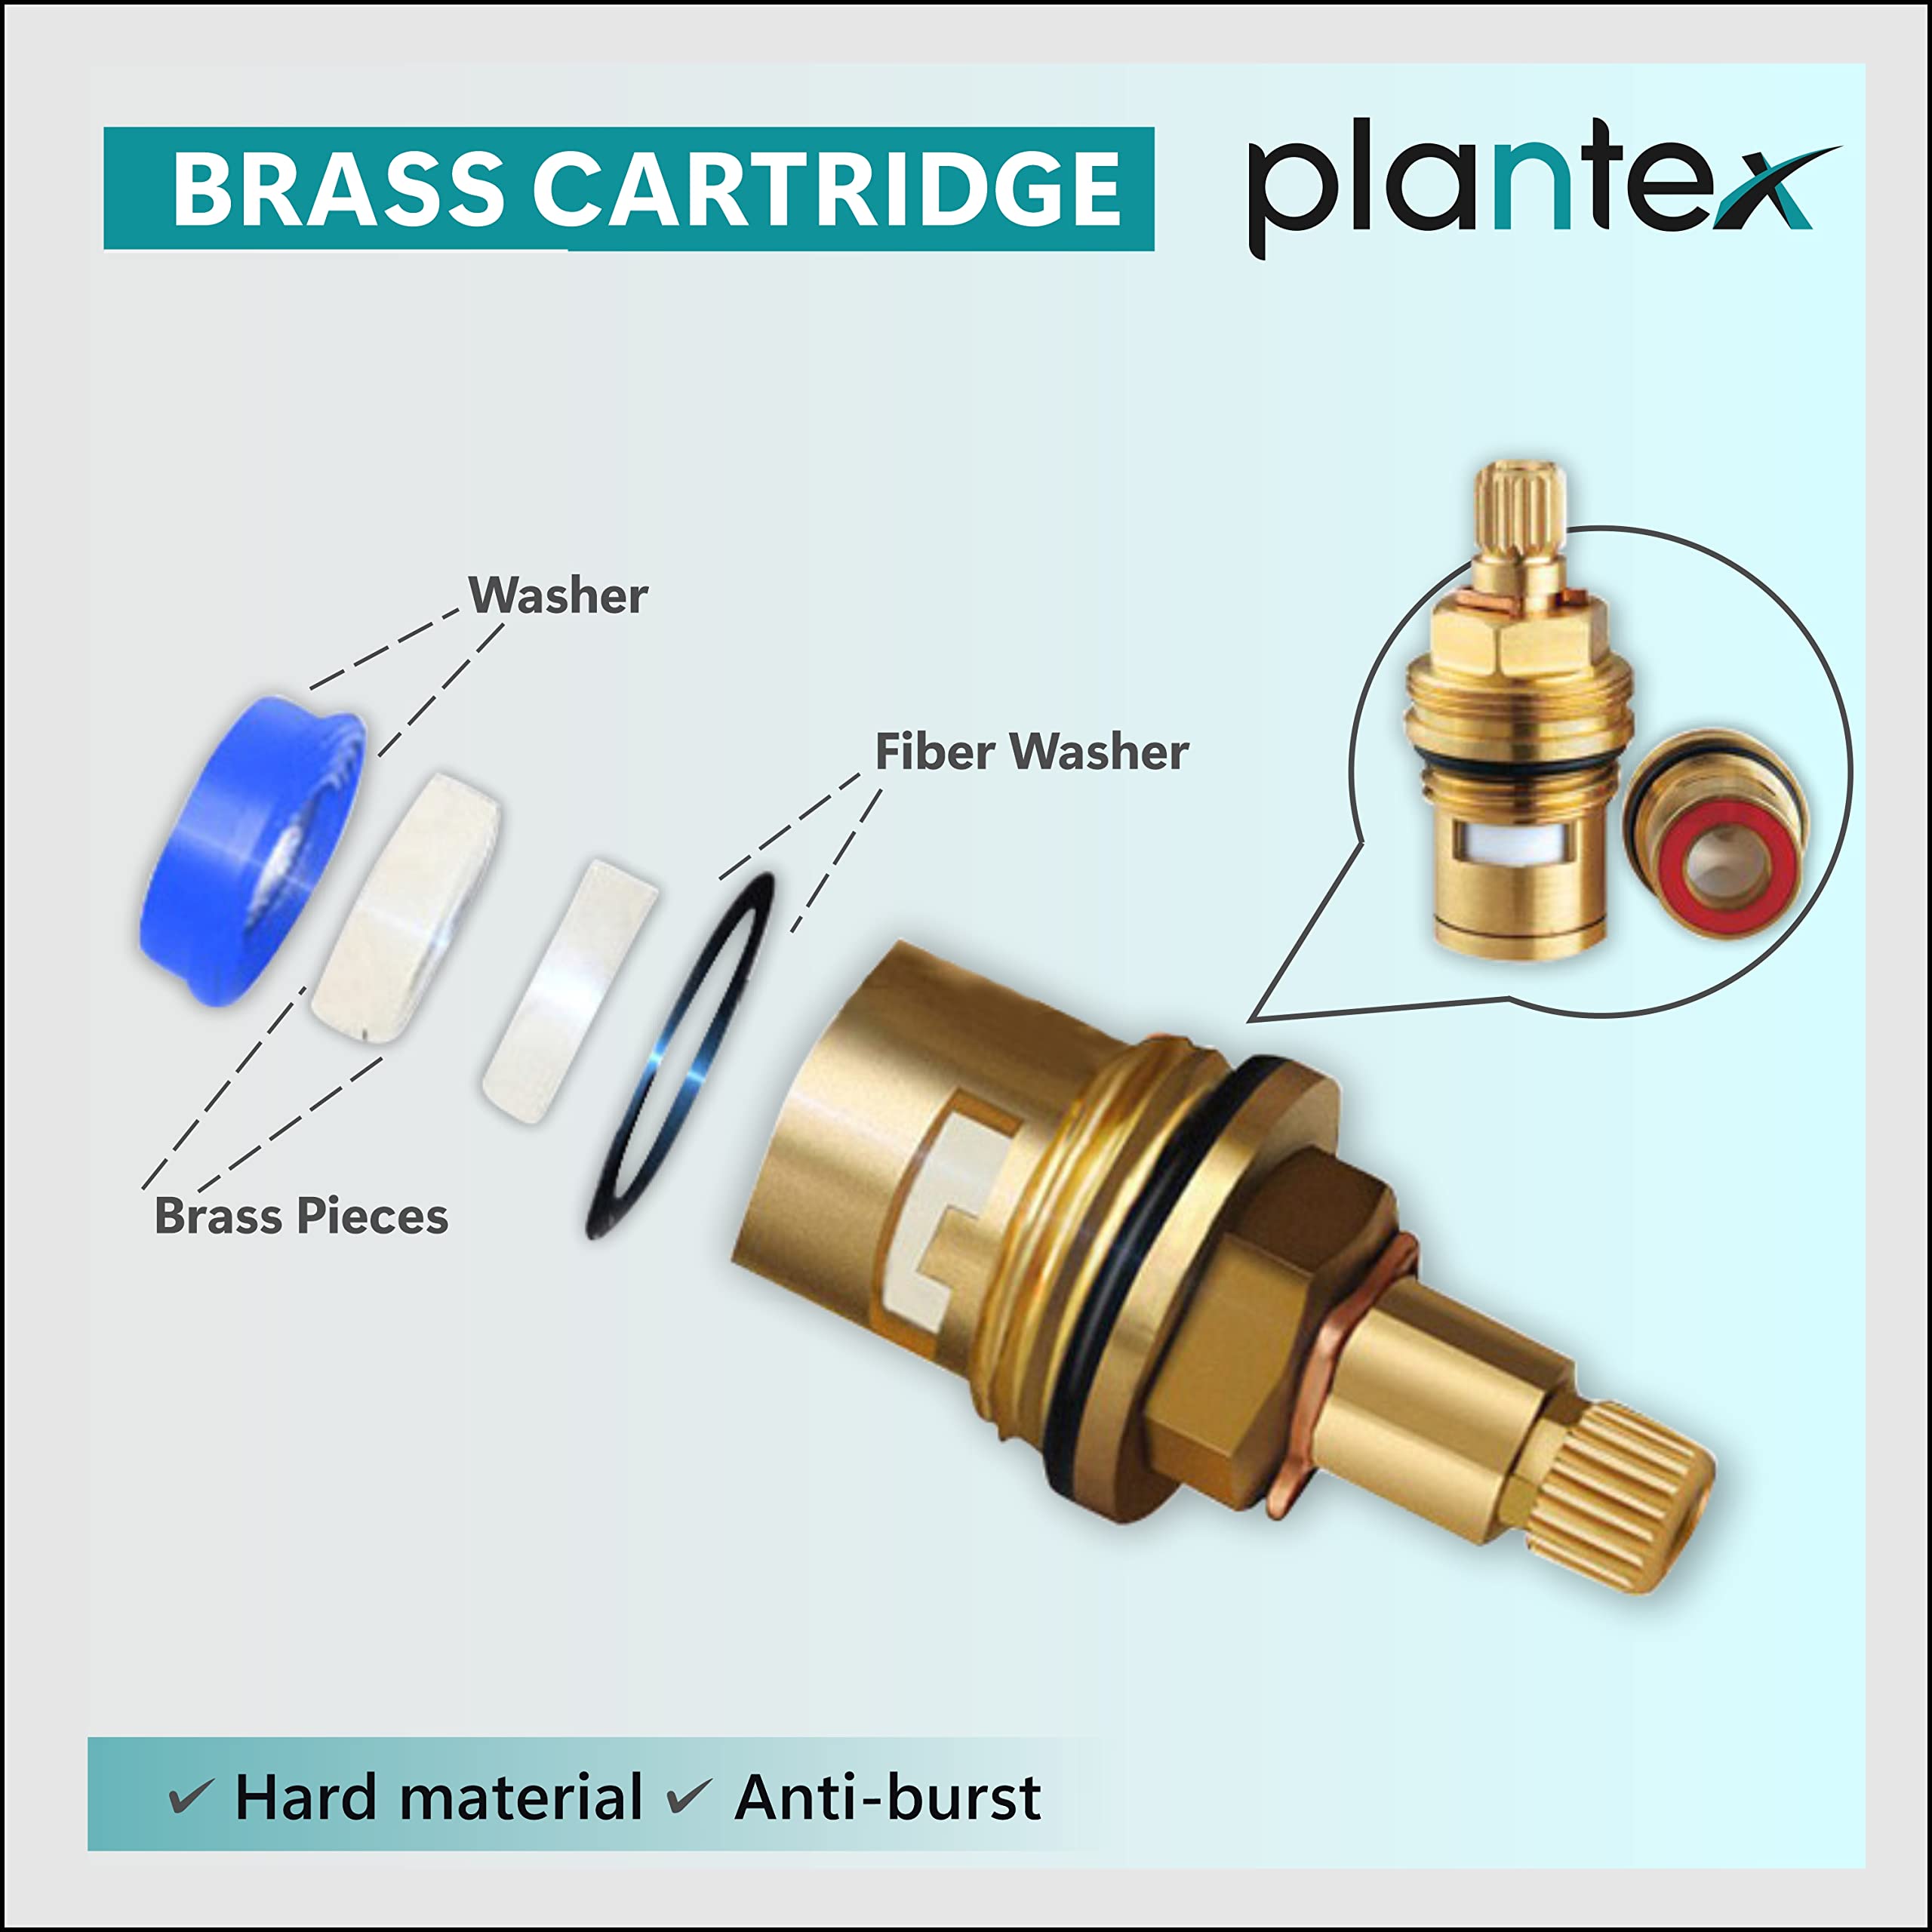 Plantex Pure Brass COL-1005 Angular Stop Cock/Stop Cock for Bathroom/Angular Valve for Wash Basin Connection With Brass Wall Flange & Teflon Tape (Mirror-Chrome Finish)